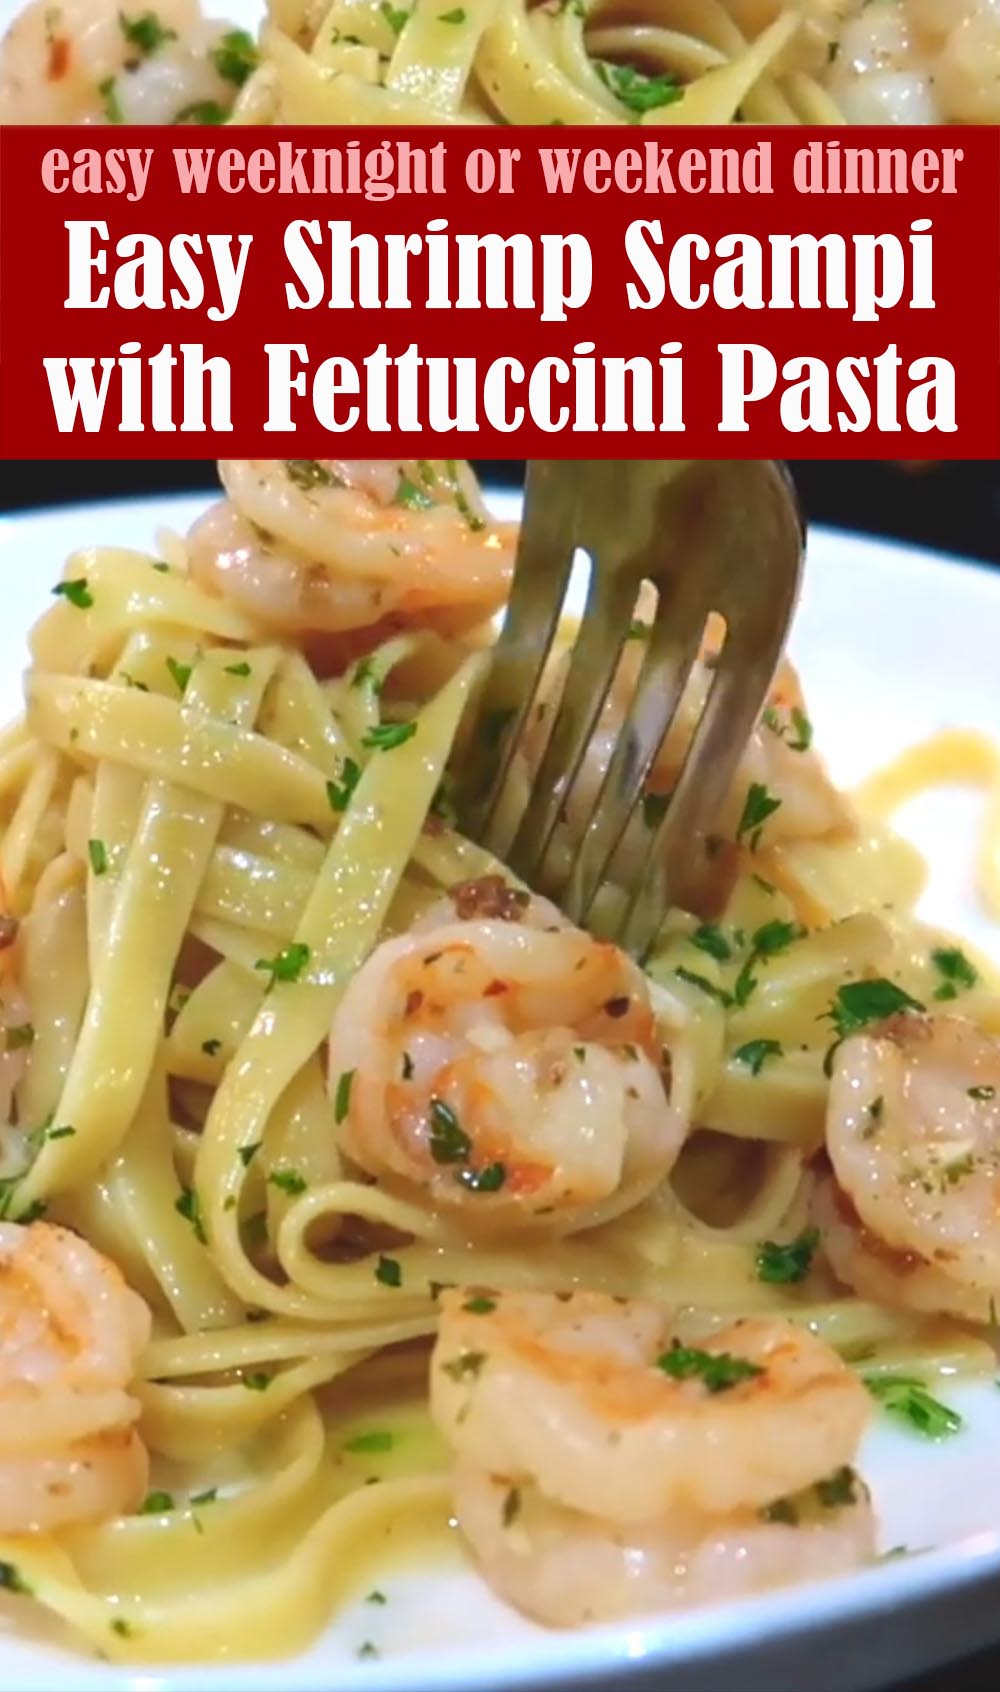 Easy Shrimp Scampi with Fettuccini (VIDEO)